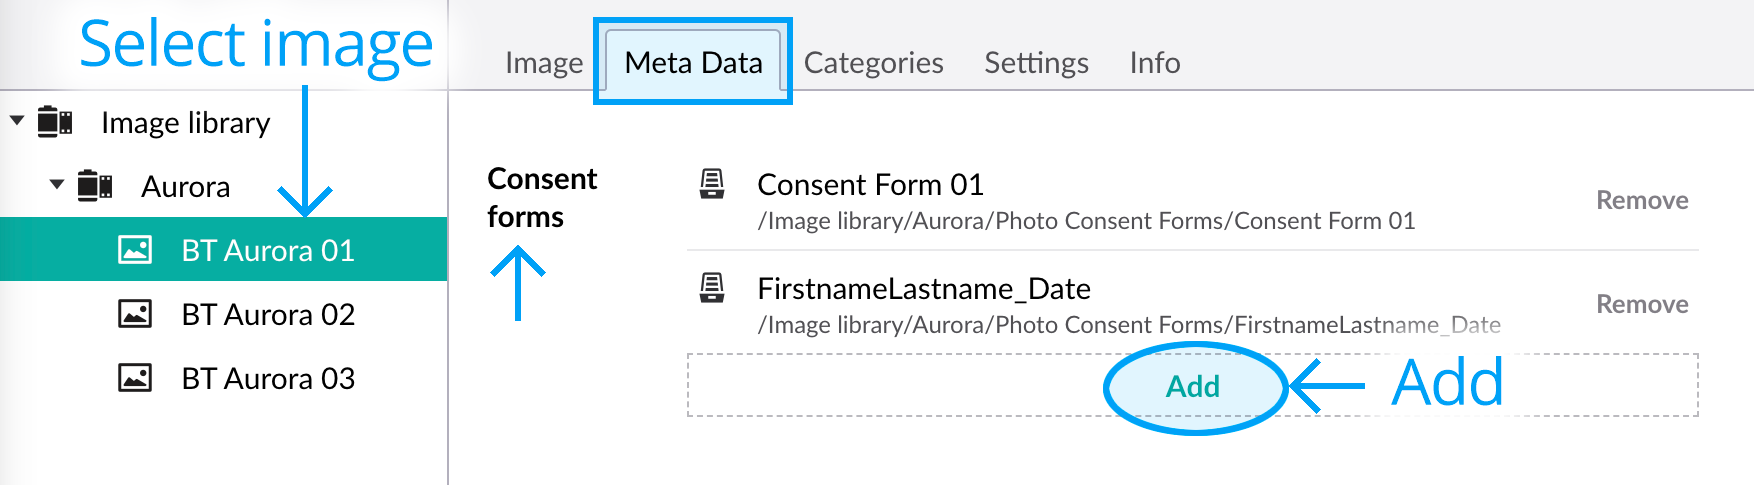 Assign consent forms to images - Add forms